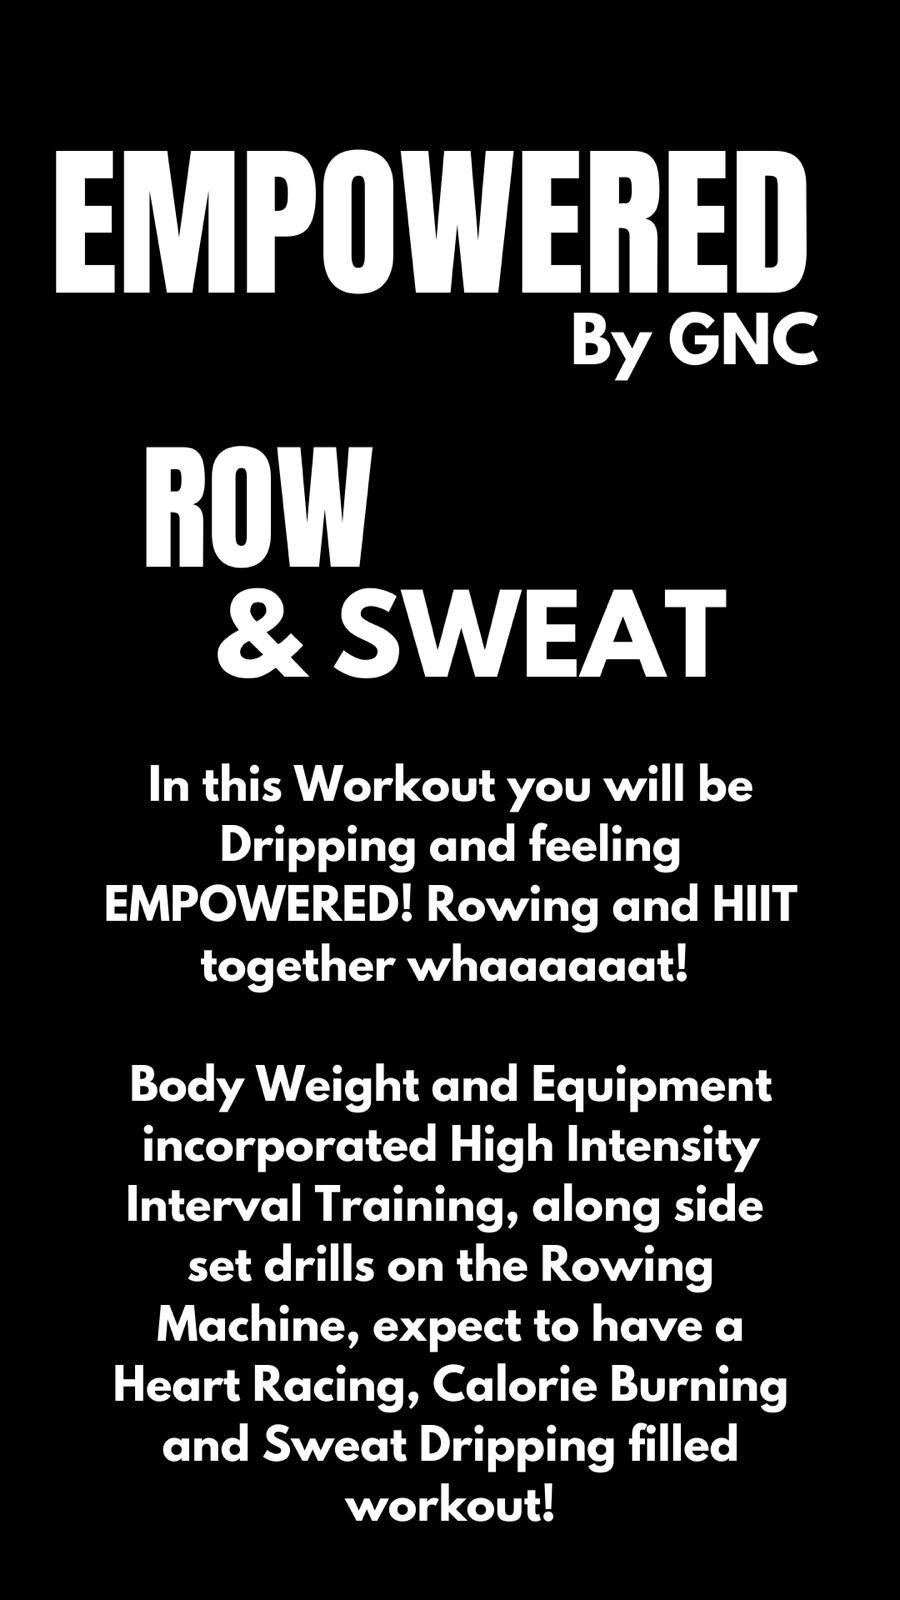 Empowered Row and Sweat by GNC